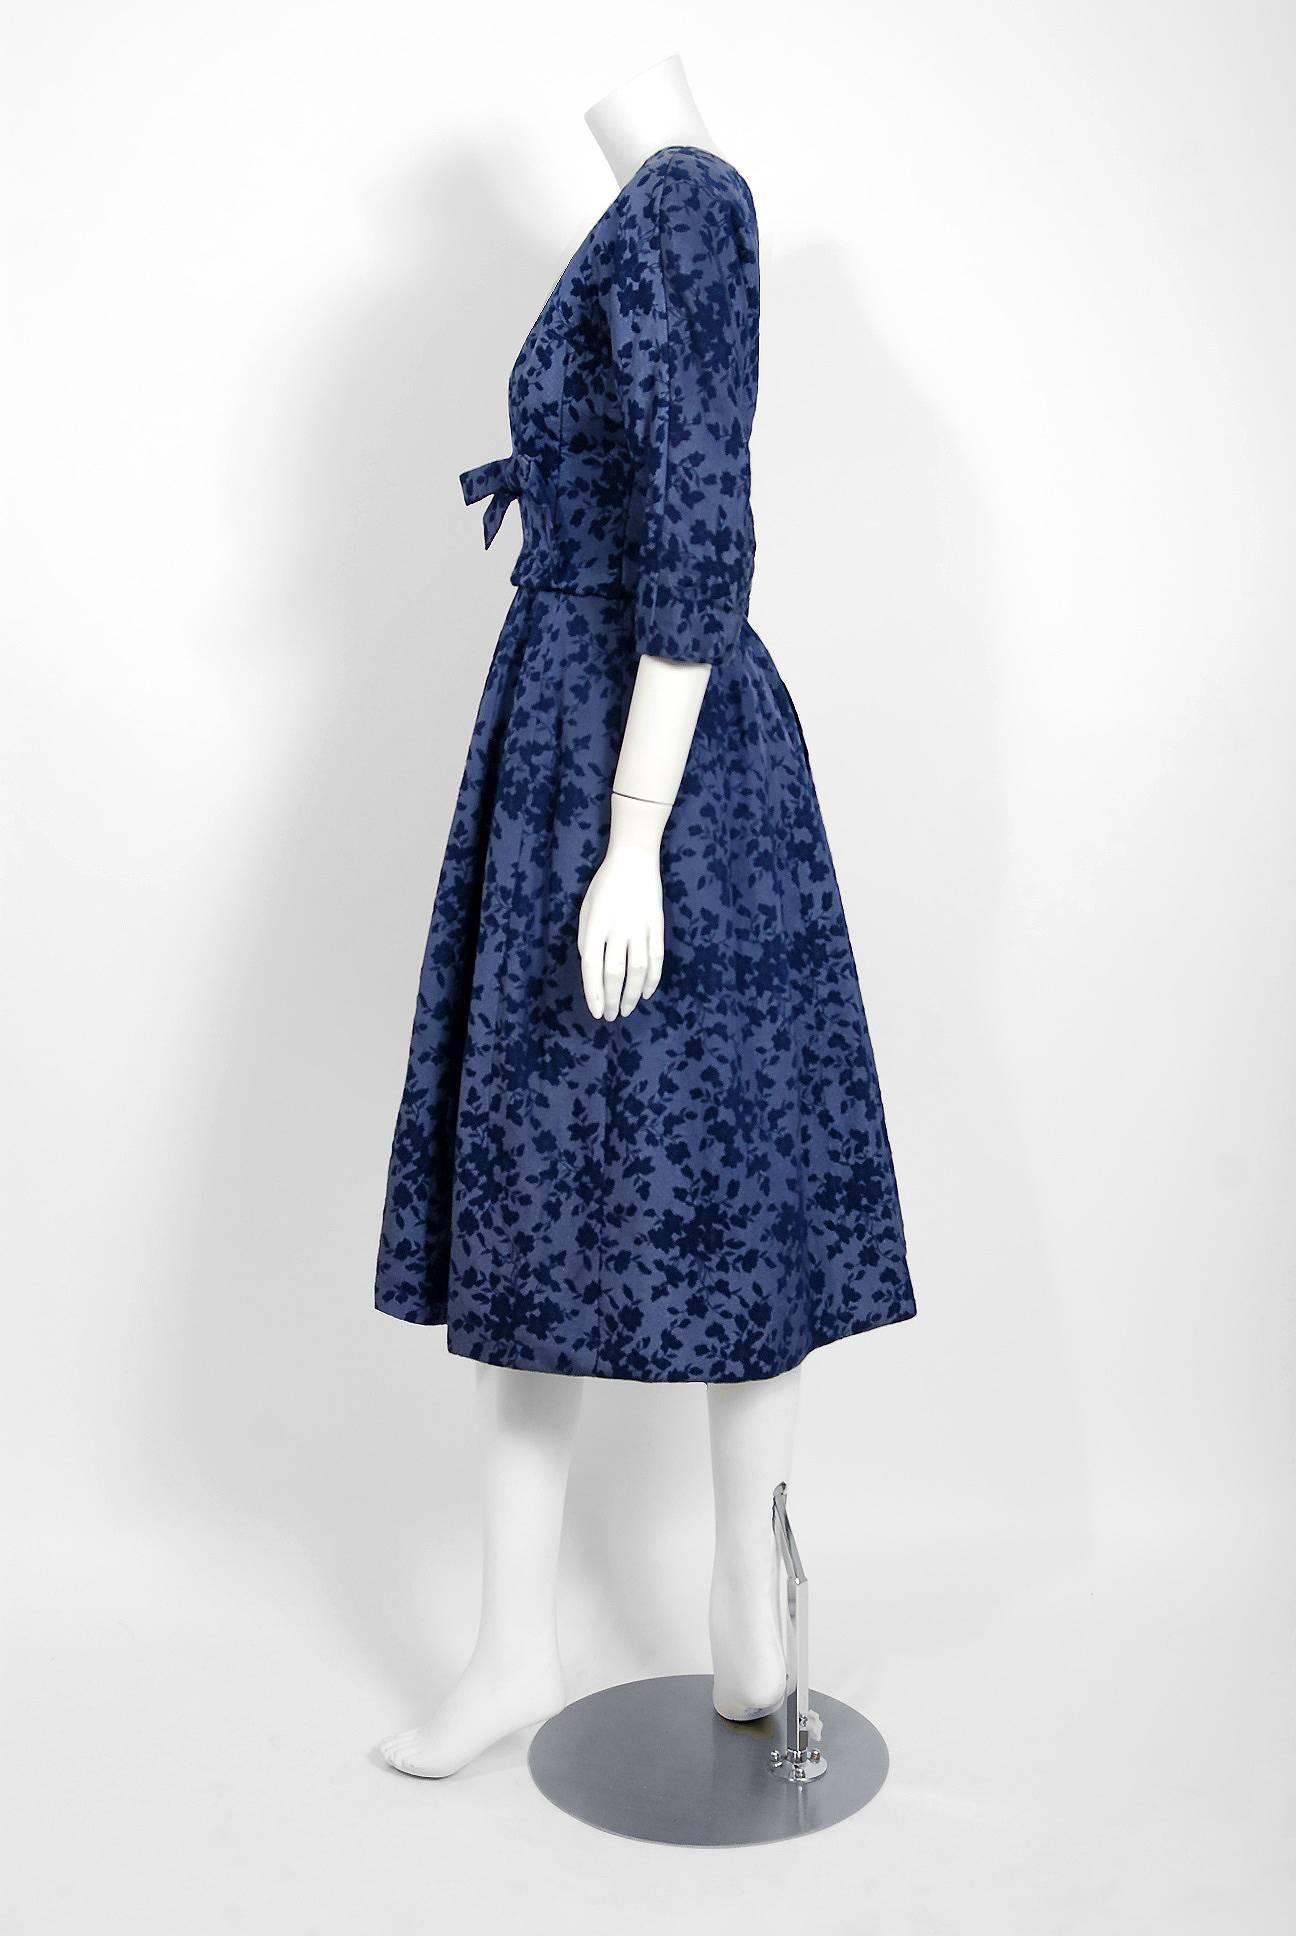 Women's Vintage 1958 YSL for Christian Dior Demi-Couture Blue Floral Silk Full Dress